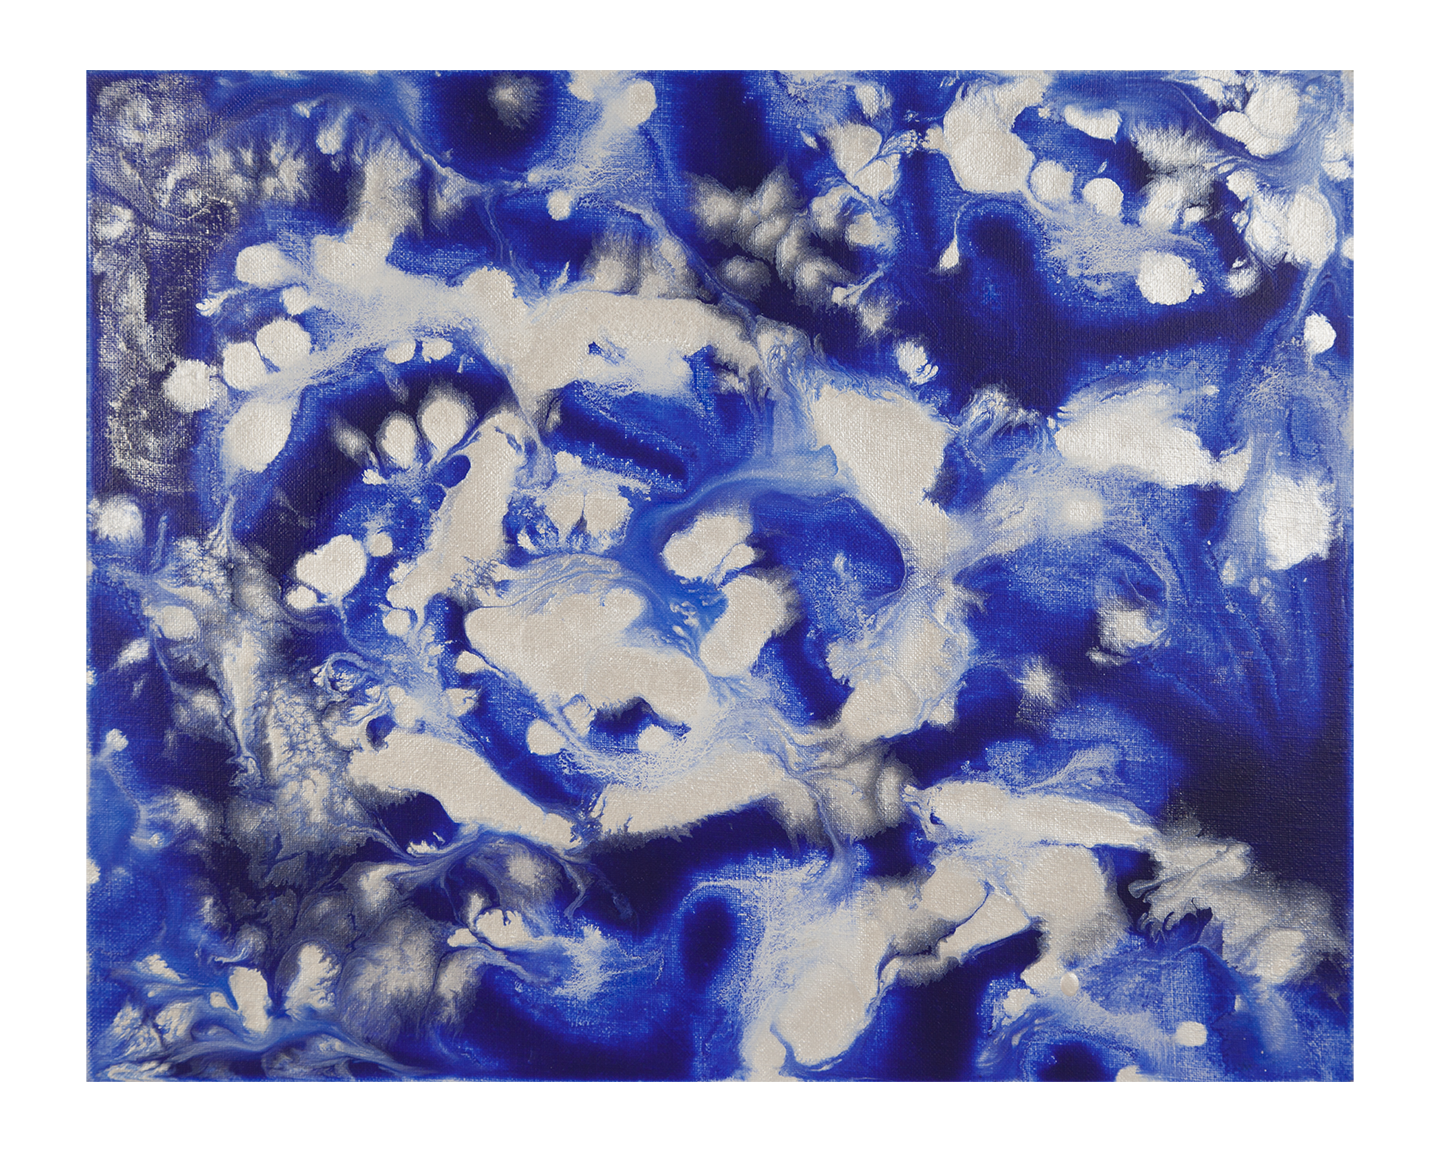 ©2021 Alicia R Peterson, *Sea of Blue*. Acrylic on 16 x 20 x 7/8-inch linen. Photographer: Peter Scheer.